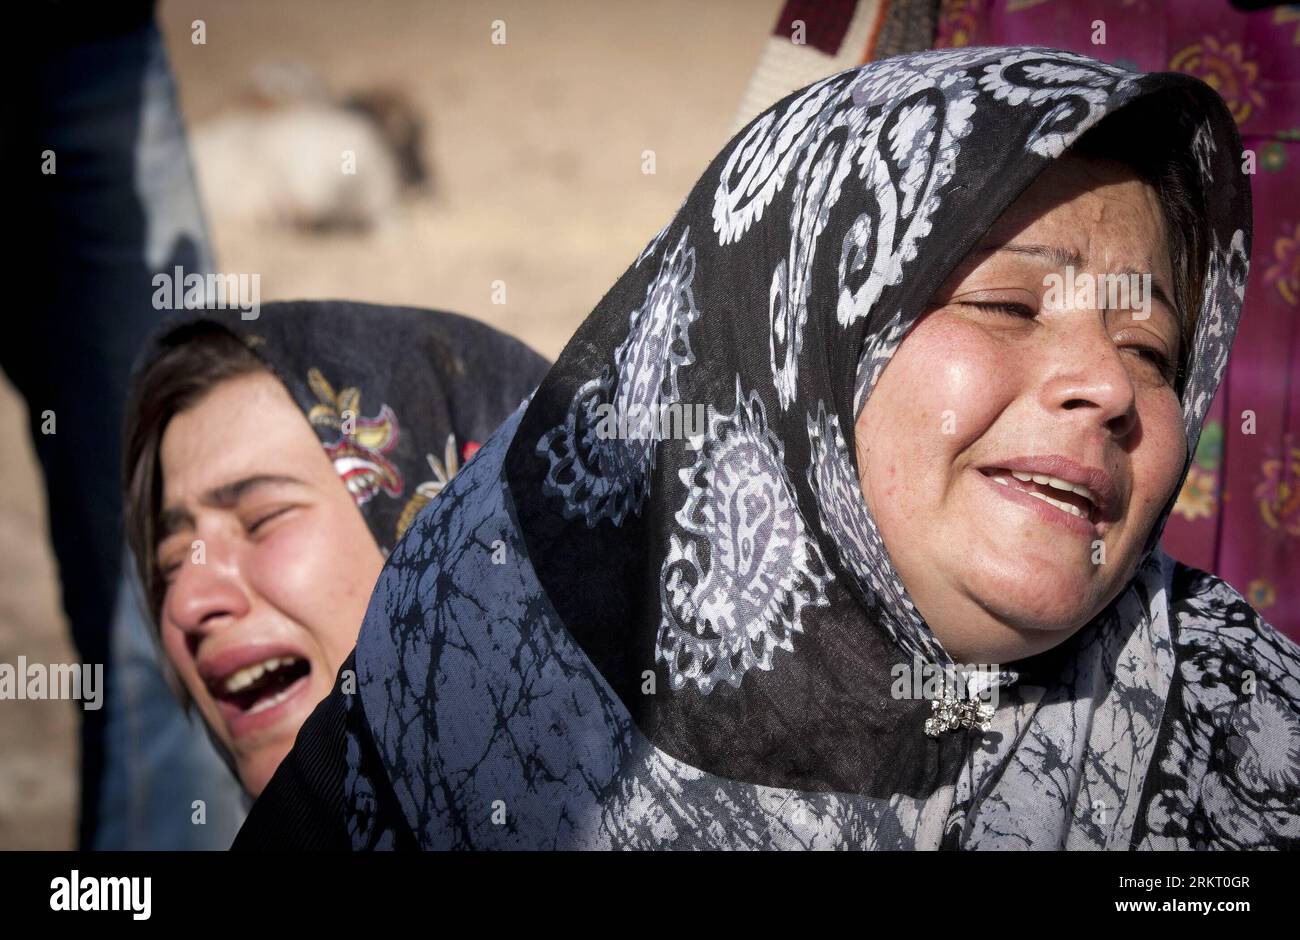 Bildnummer: 58338507  Datum: 12.08.2012  Copyright: imago/Xinhua (120812) -- TEHRAN, Aug. 12, 2012 (Xinhua) -- Two Iranian women cry after an earthquake in Varzaqan in northwest Iran, on Aug. 12, 2012. The death toll of Saturday s strong twin quakes in northwest Iran has risen to some 300, the semi- official Fars news agency cited an official as saying on Sunday. (Xinhua/Ahmad Halabisaz) IRAN-EARTHQUAKE PUBLICATIONxNOTxINxCHN Gesellschaft Iran Katastrophe Naturkatastrophe Erdbeben x0x xst premiumd 2012 quer      58338507 Date 12 08 2012 Copyright Imago XINHUA  TEHRAN Aug 12 2012 XINHUA Two Ira Stock Photo